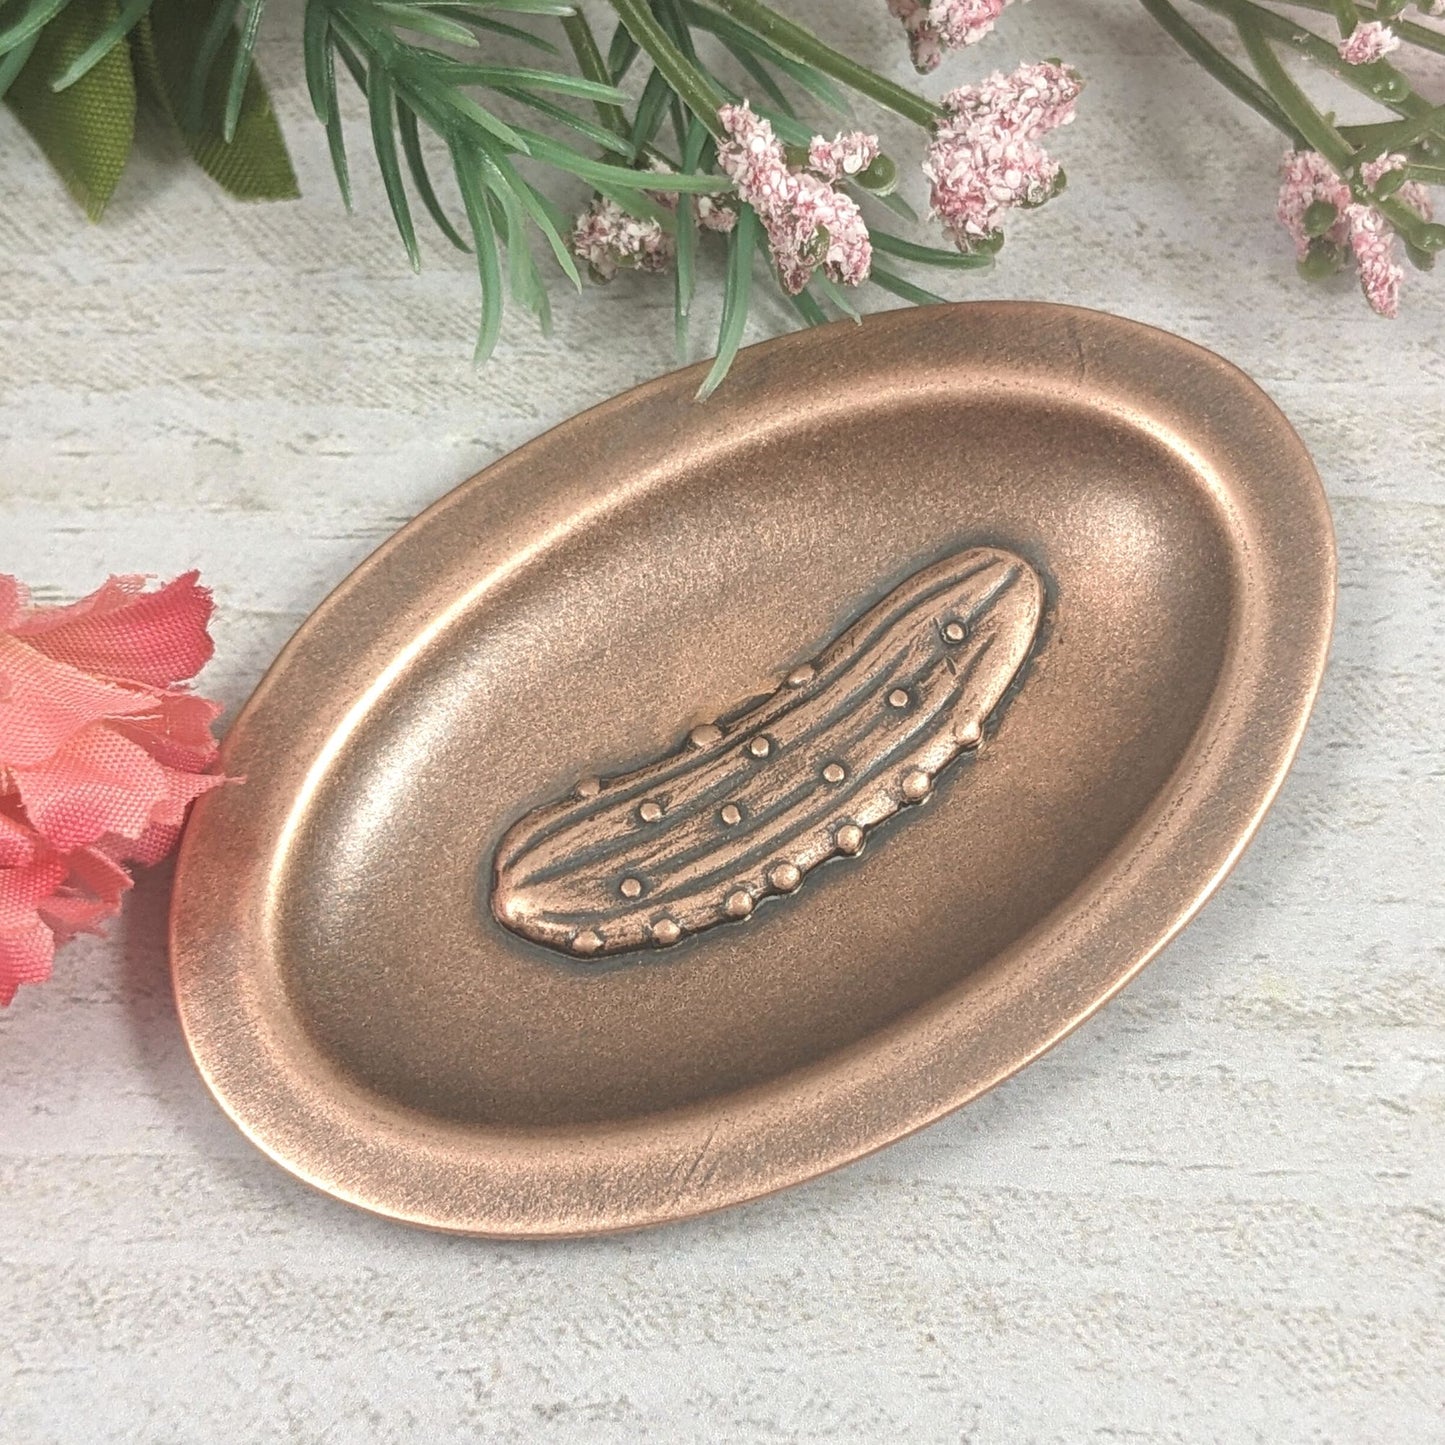 Oval ring dish made of copper. The dish has a shallow bowl with a lip around the edge. Centered on the bottom of the dish is a three-dimensional design of a pickle, also made of copper. The pickle is large and has stipples and ridges, just like a fresh from the garden pickle would have.  The design is oxidized, which means the recessed parts of the pickle are dark, almost black. Staged with flowers.